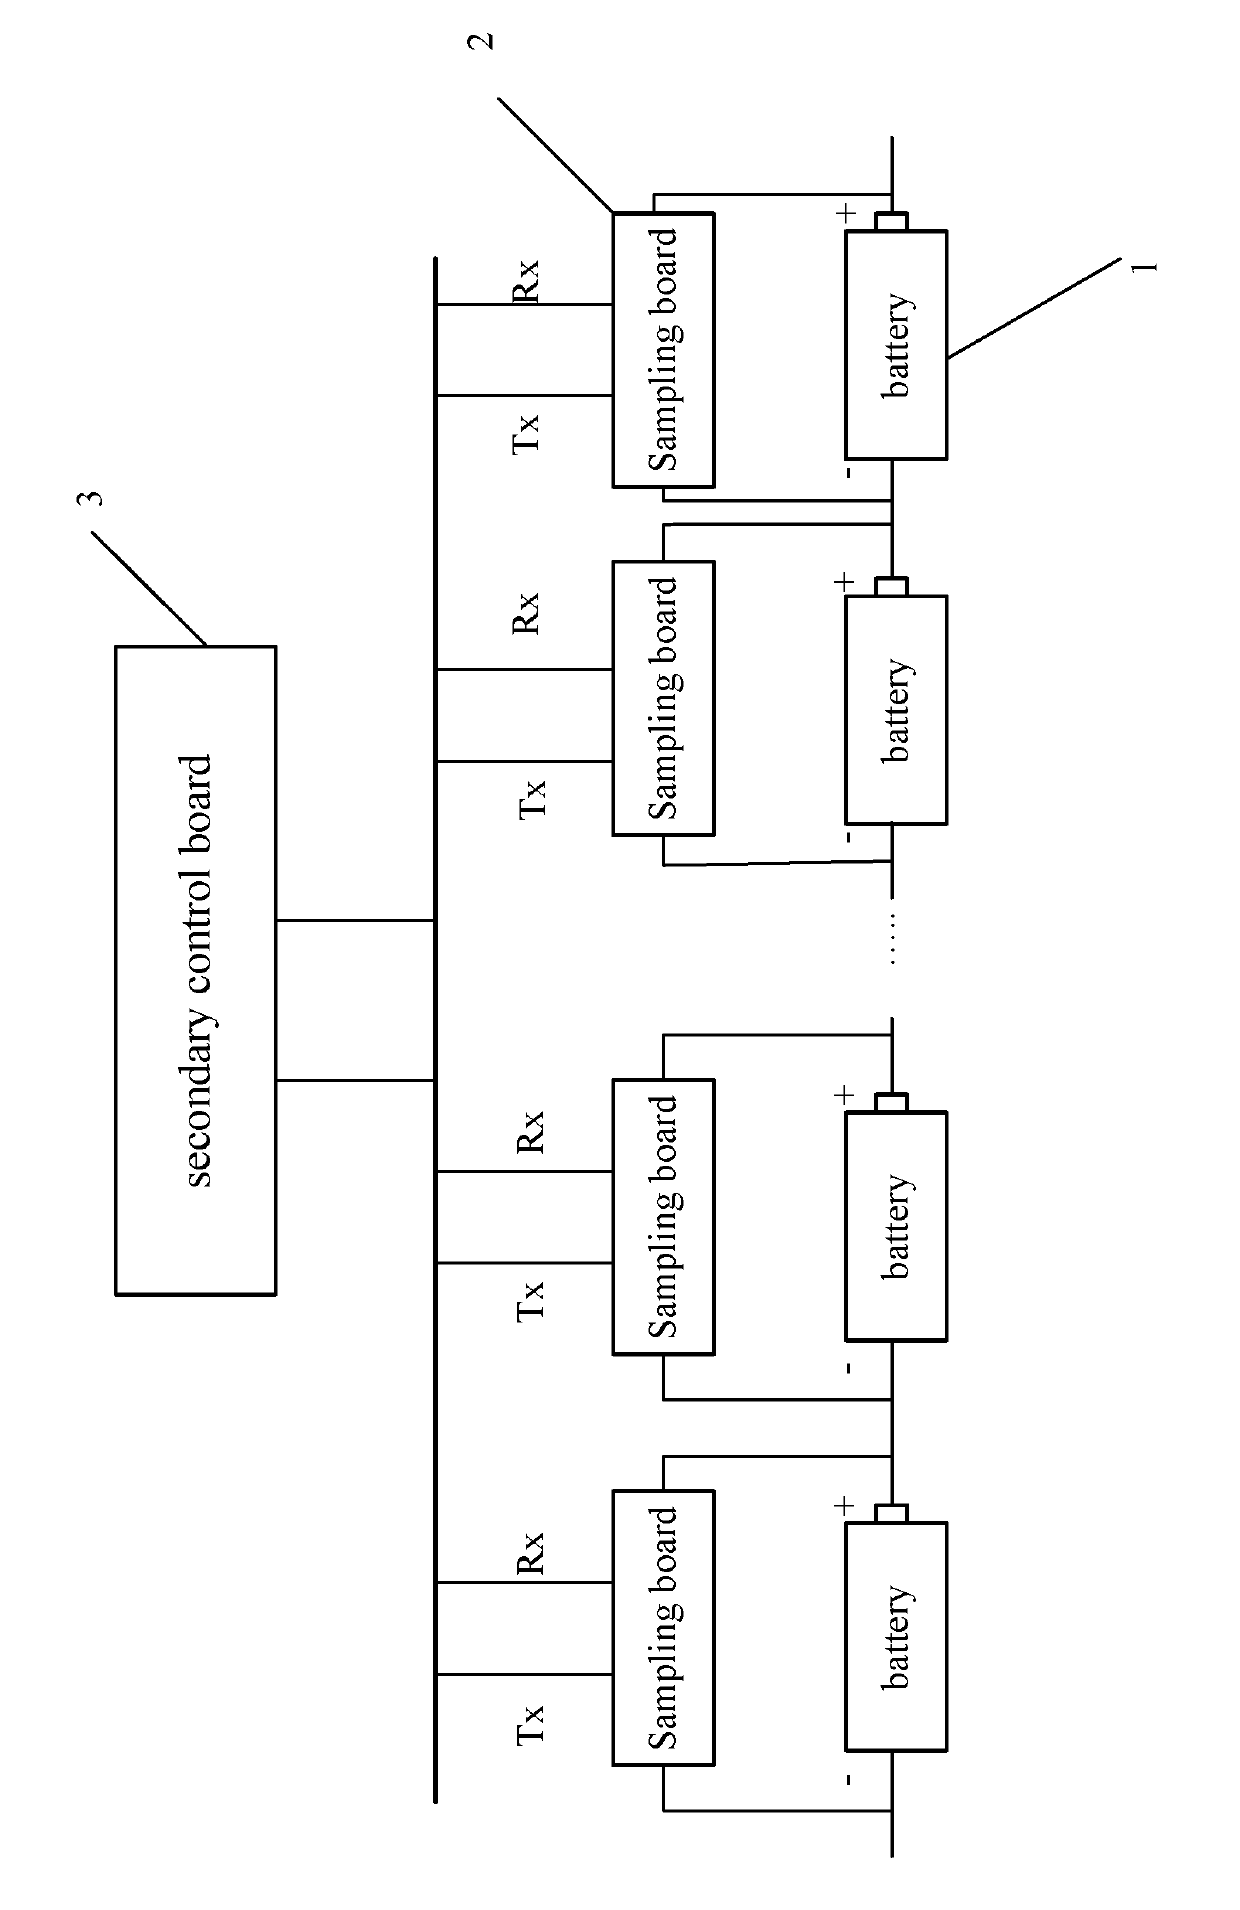 Bus-based information collection system with micro power consumption for battery packages